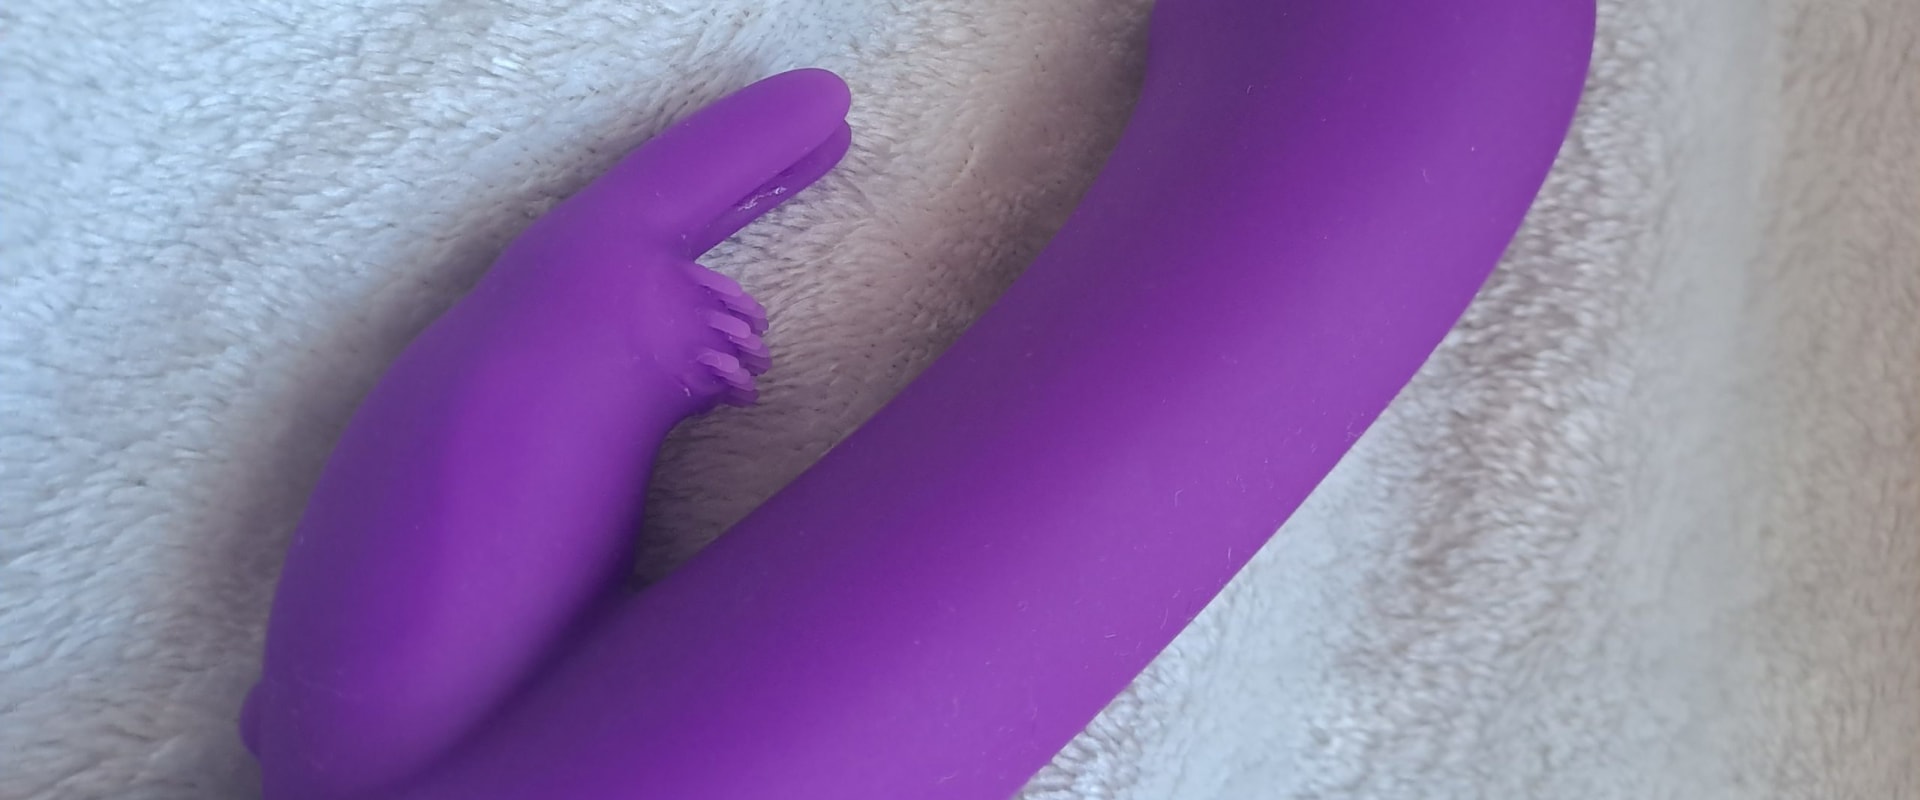 All You Need to Know About G-Spot Rabbit Vibrators